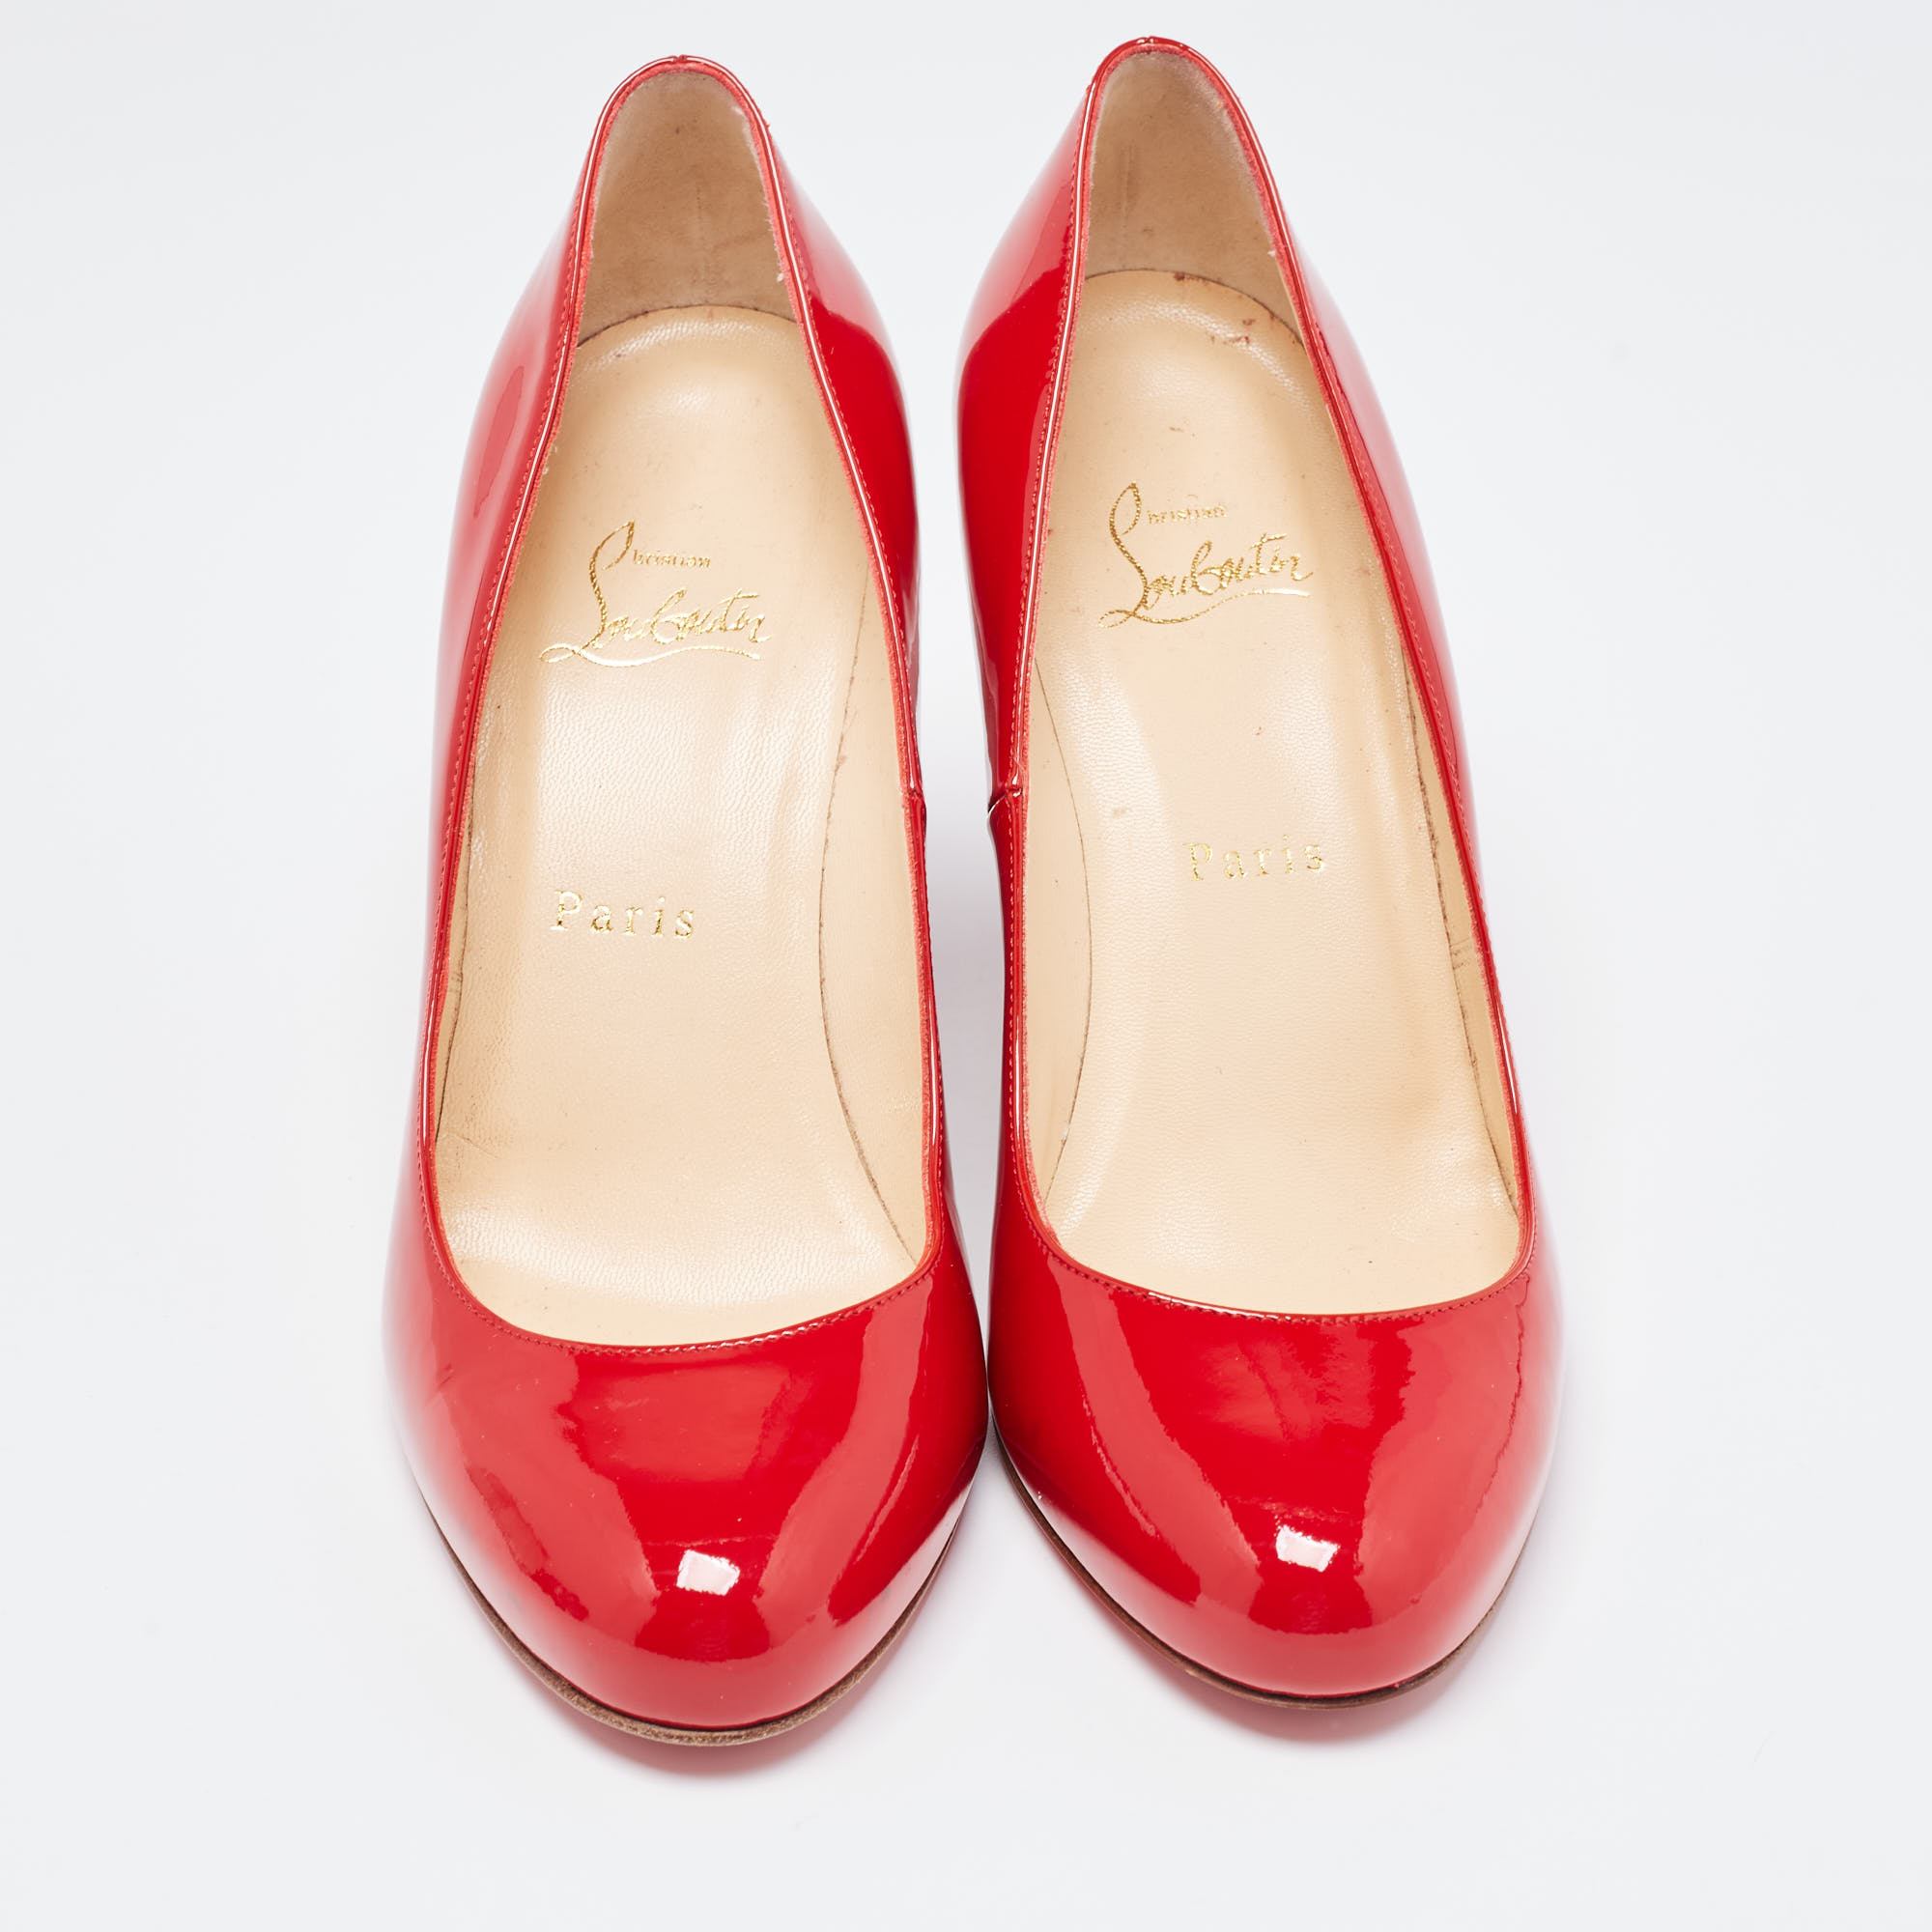 Christian Louboutin Red Patent Leather Ron Ron Wedge Pumps Size 38.5